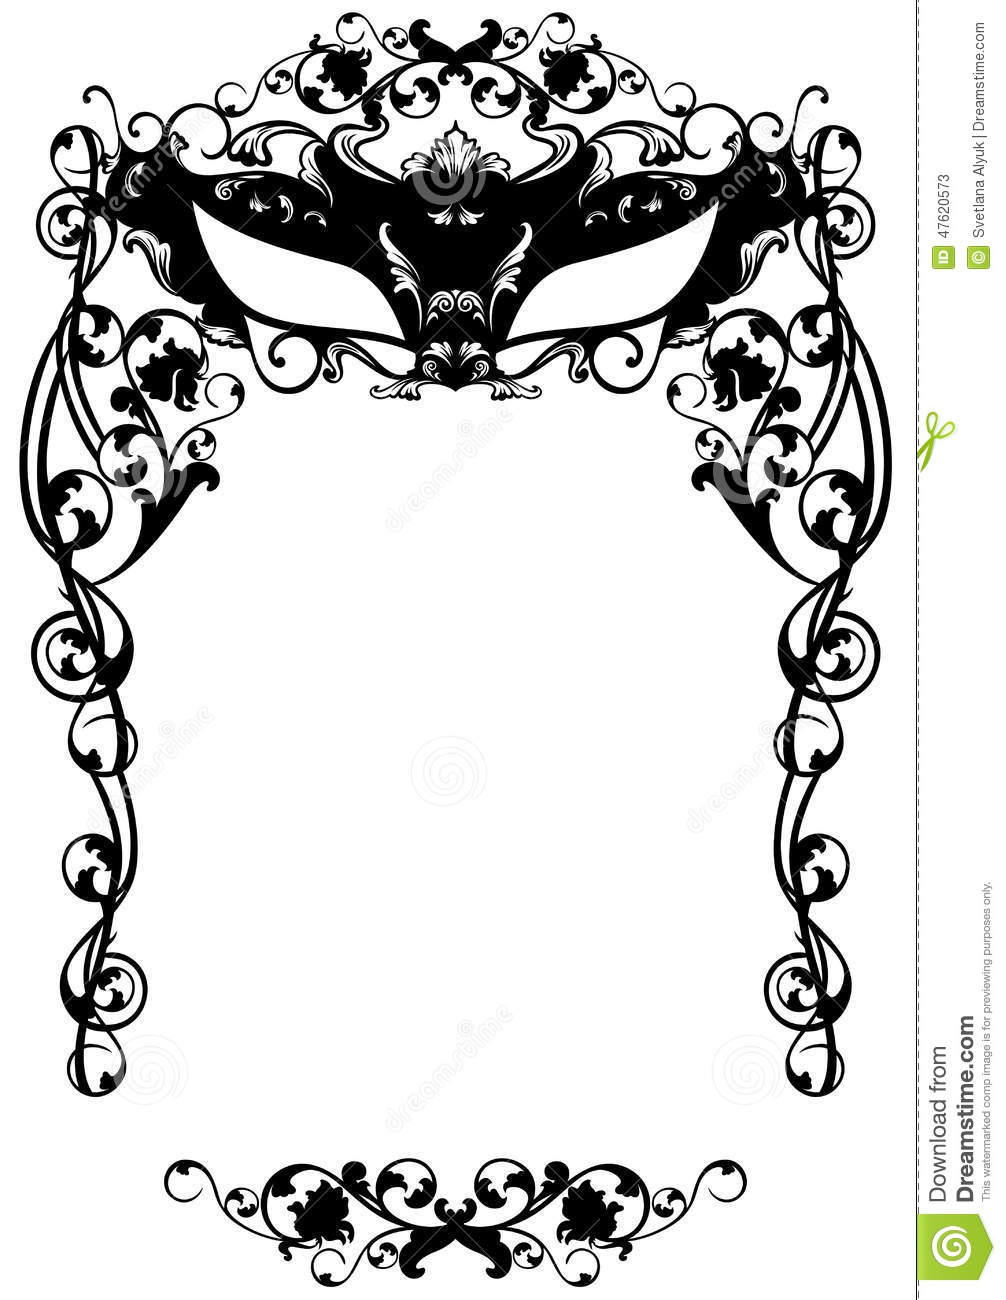 Invitation To Masquerade Party With Carnival Mask   Black And White    